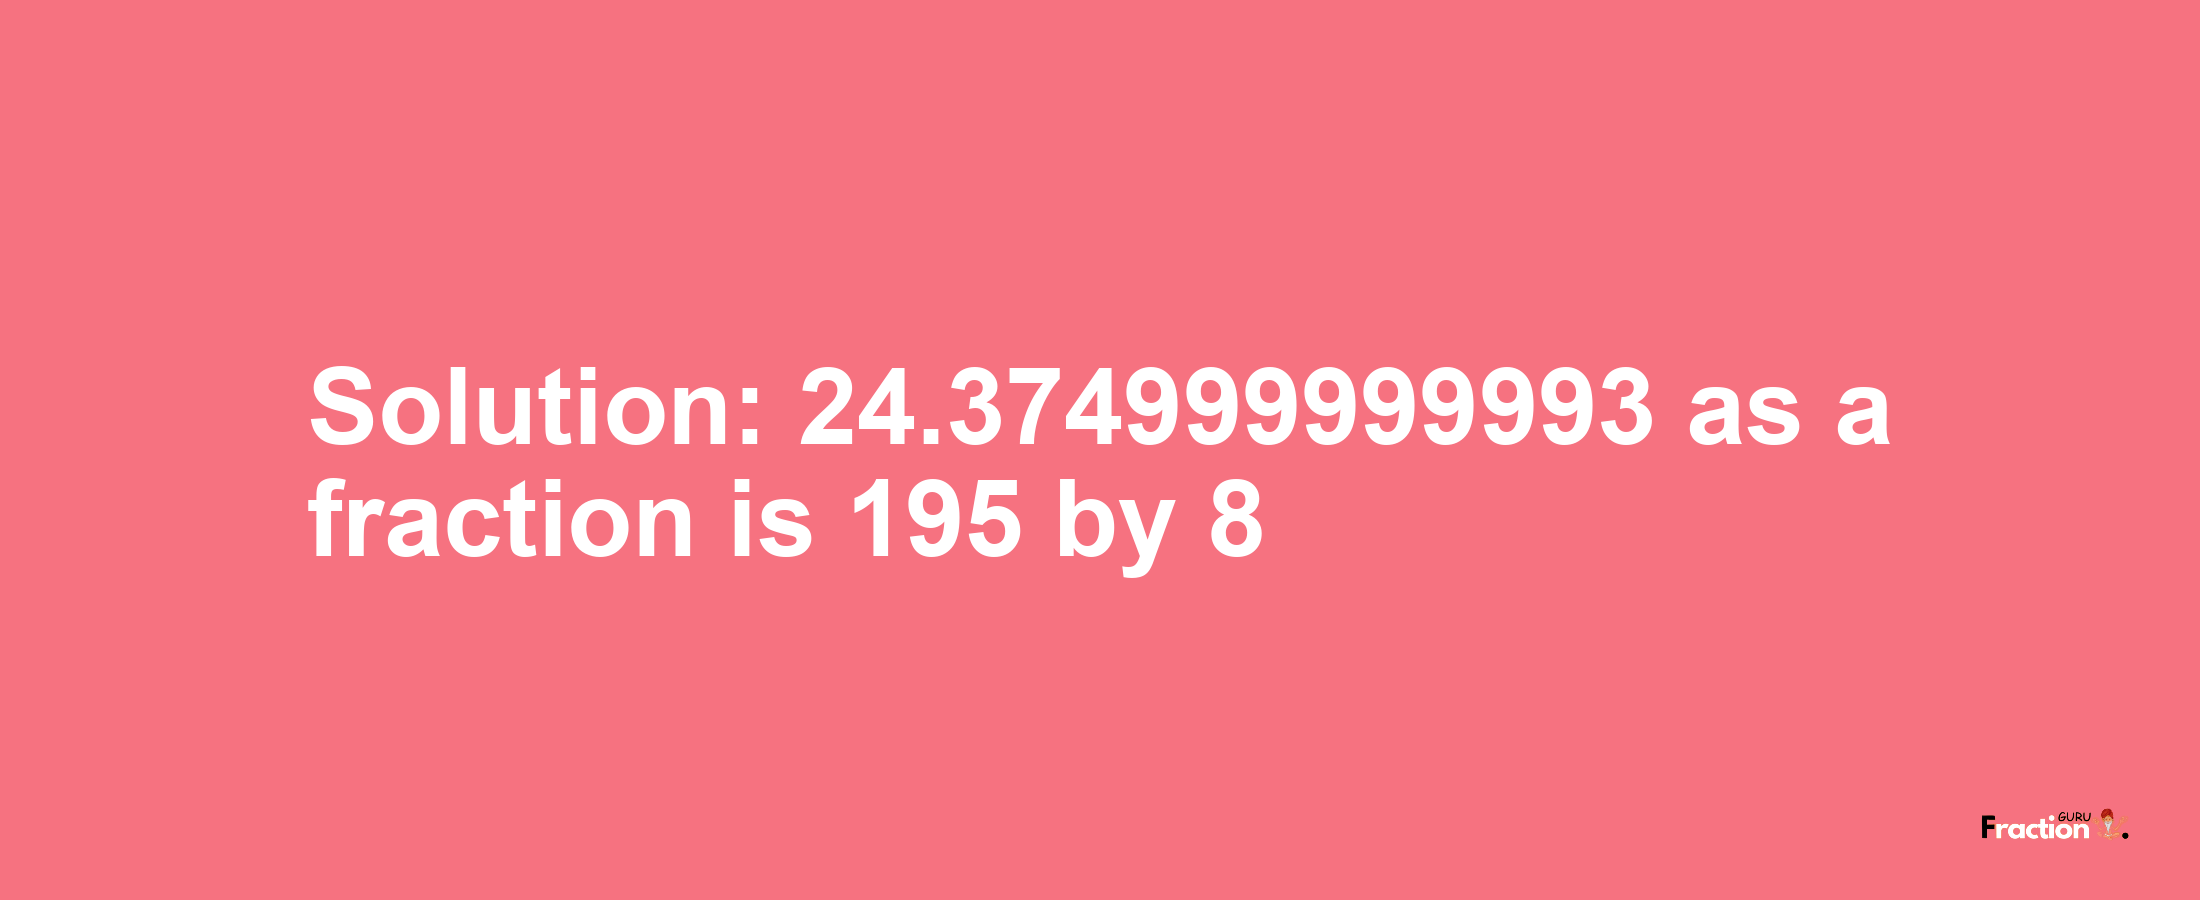 Solution:24.374999999993 as a fraction is 195/8